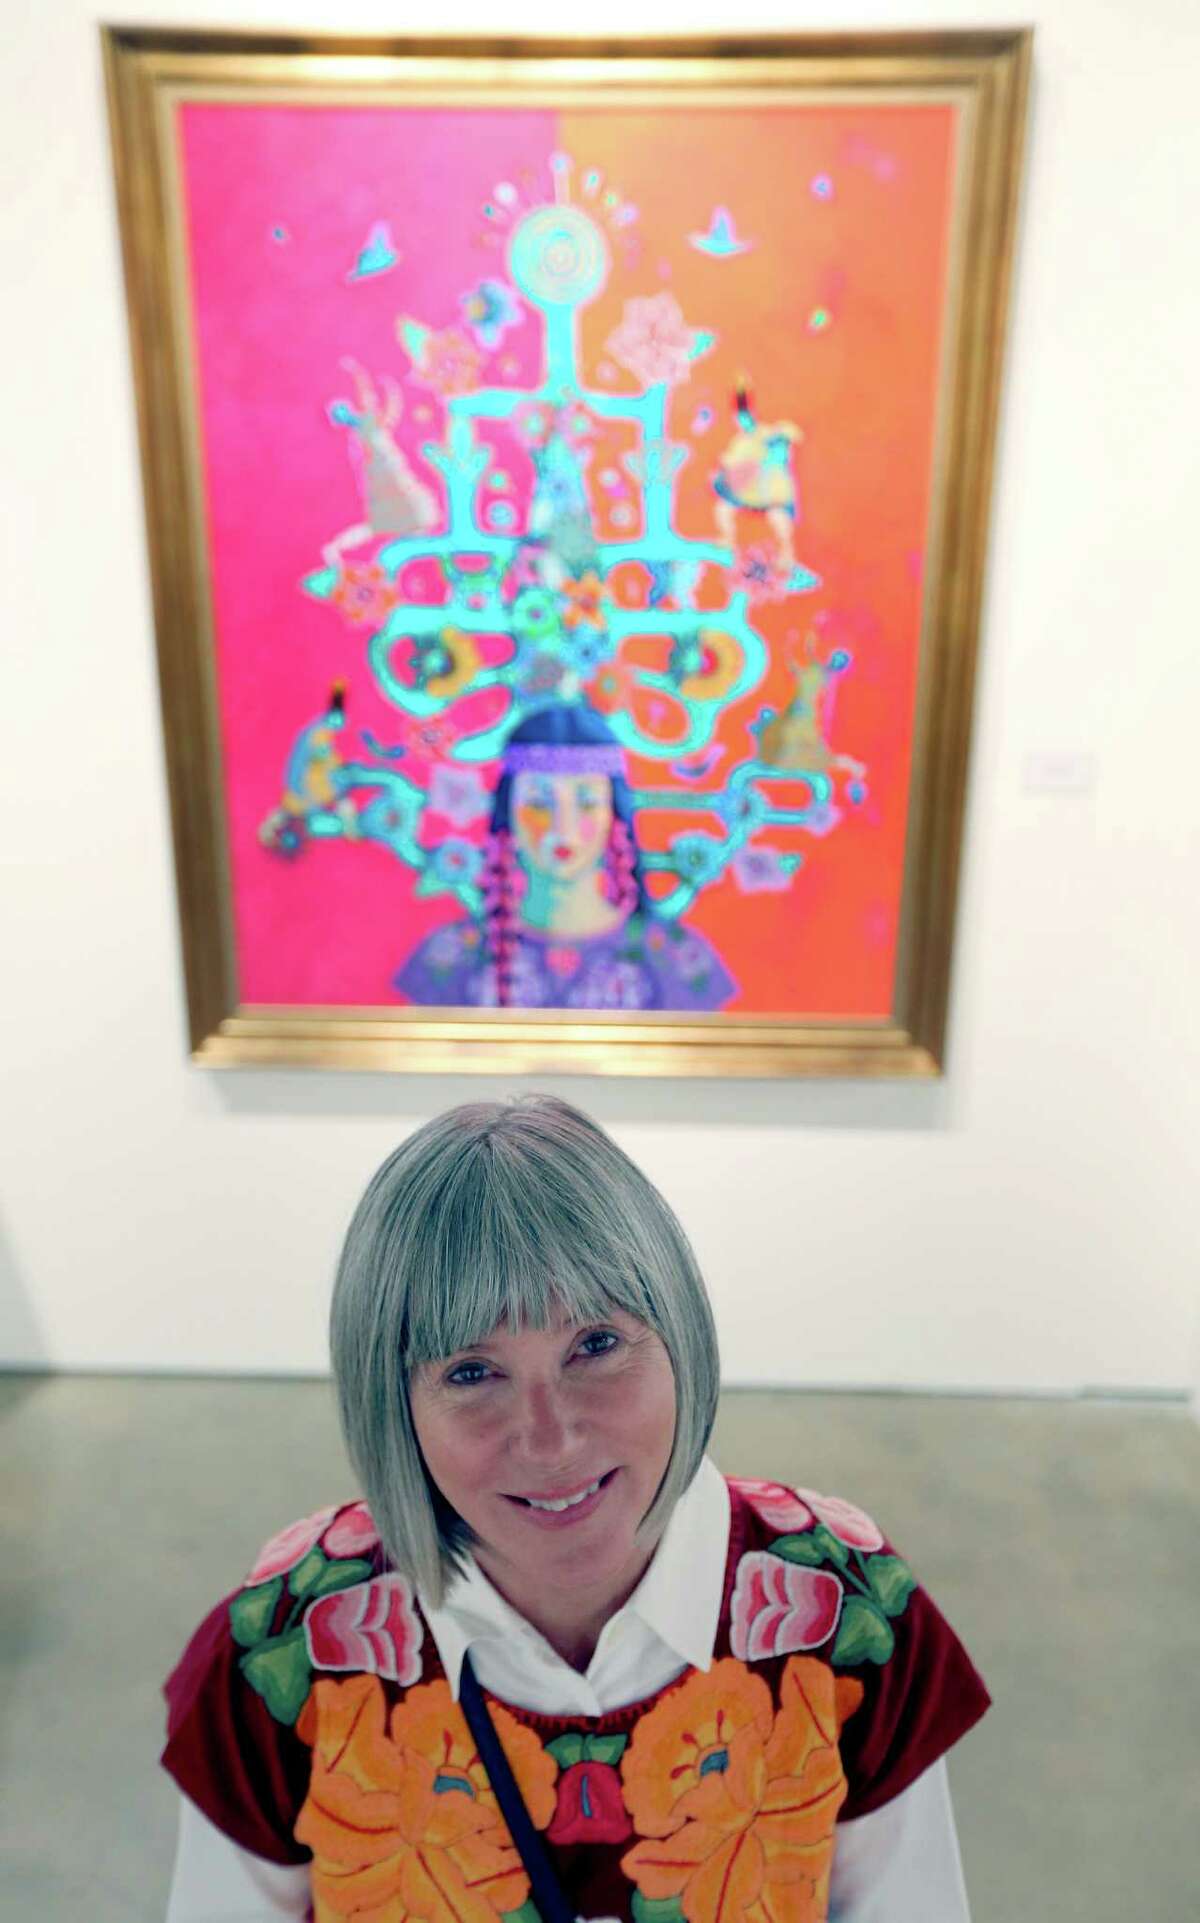 Kathy Sosa poses Oct. 6, 2015 in front of one of her paintings on display at the TAMU-SA Centro de Artes.